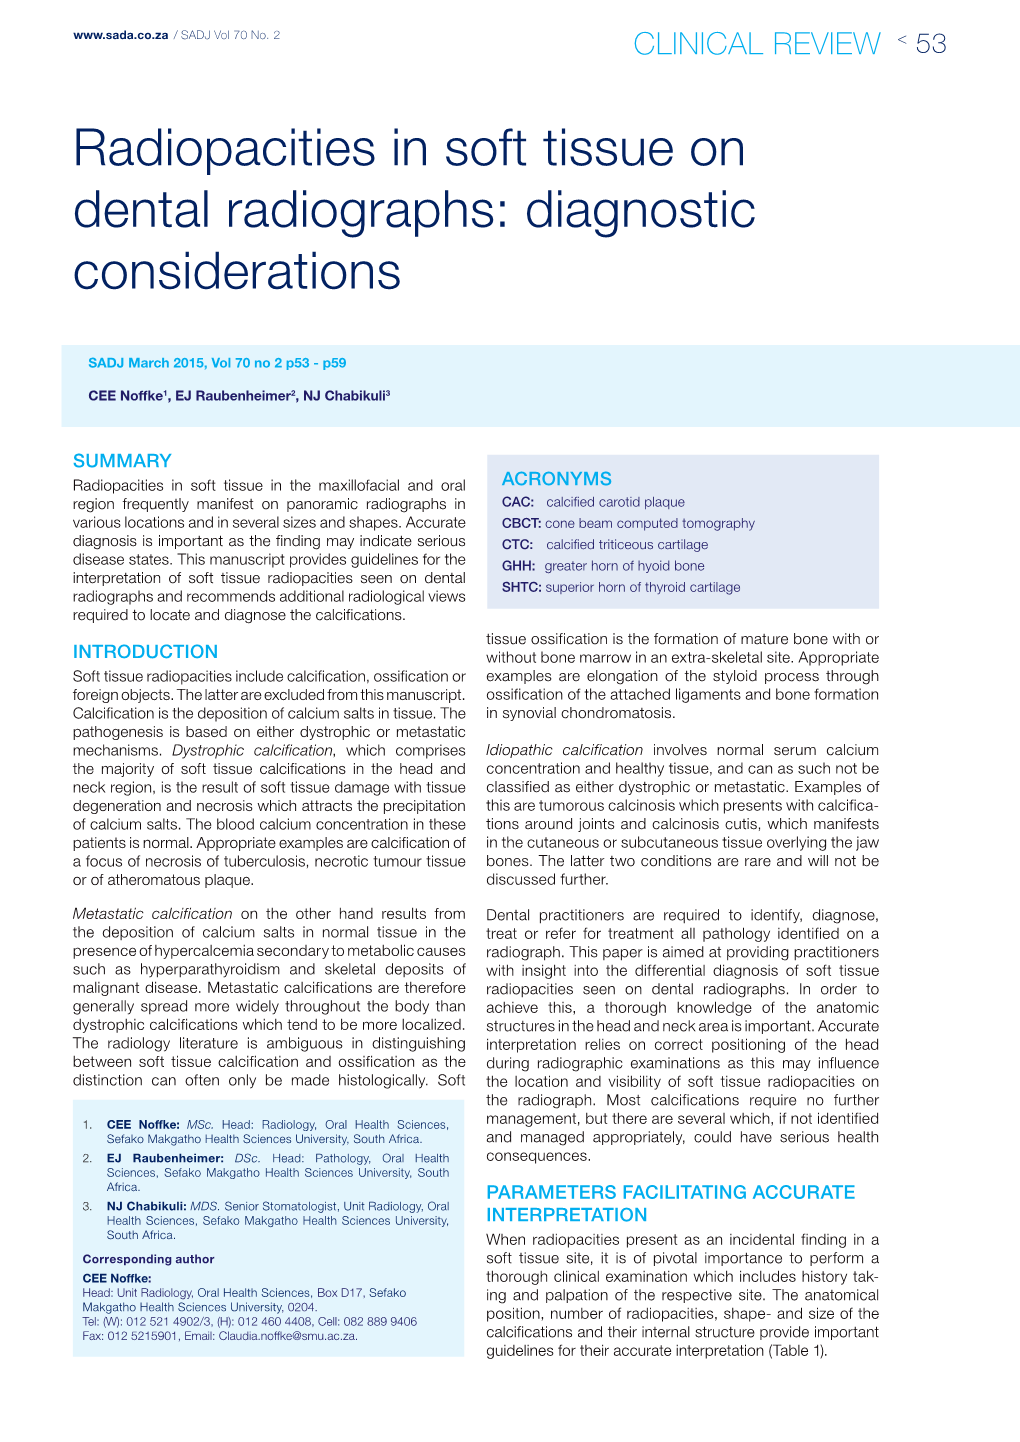 Radiopacities in Soft Tissue on Dental Radiographs: Diagnostic Considerations